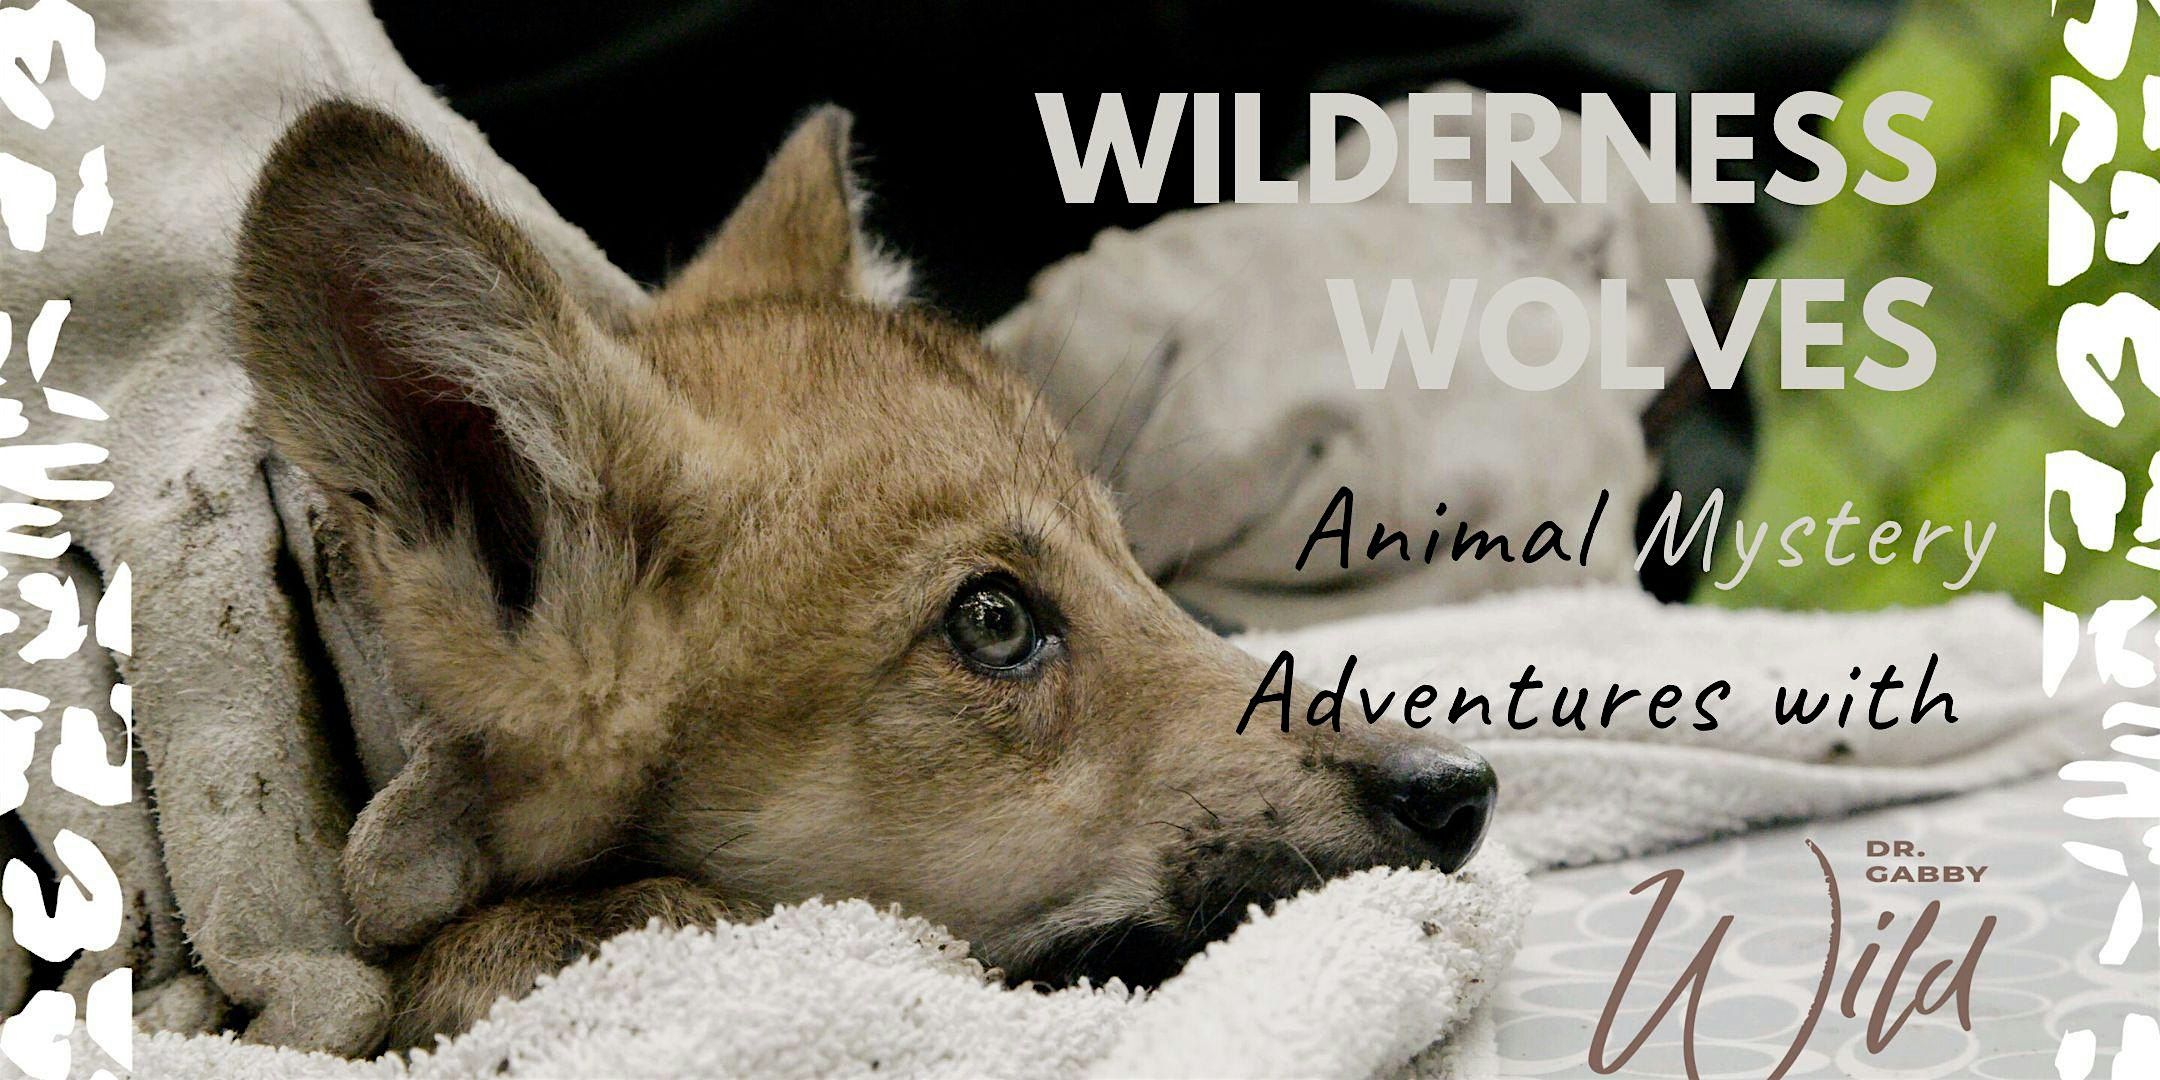 Wilderness Wolves: Animal Mystery Adventures with Dr. Gabby Wild!